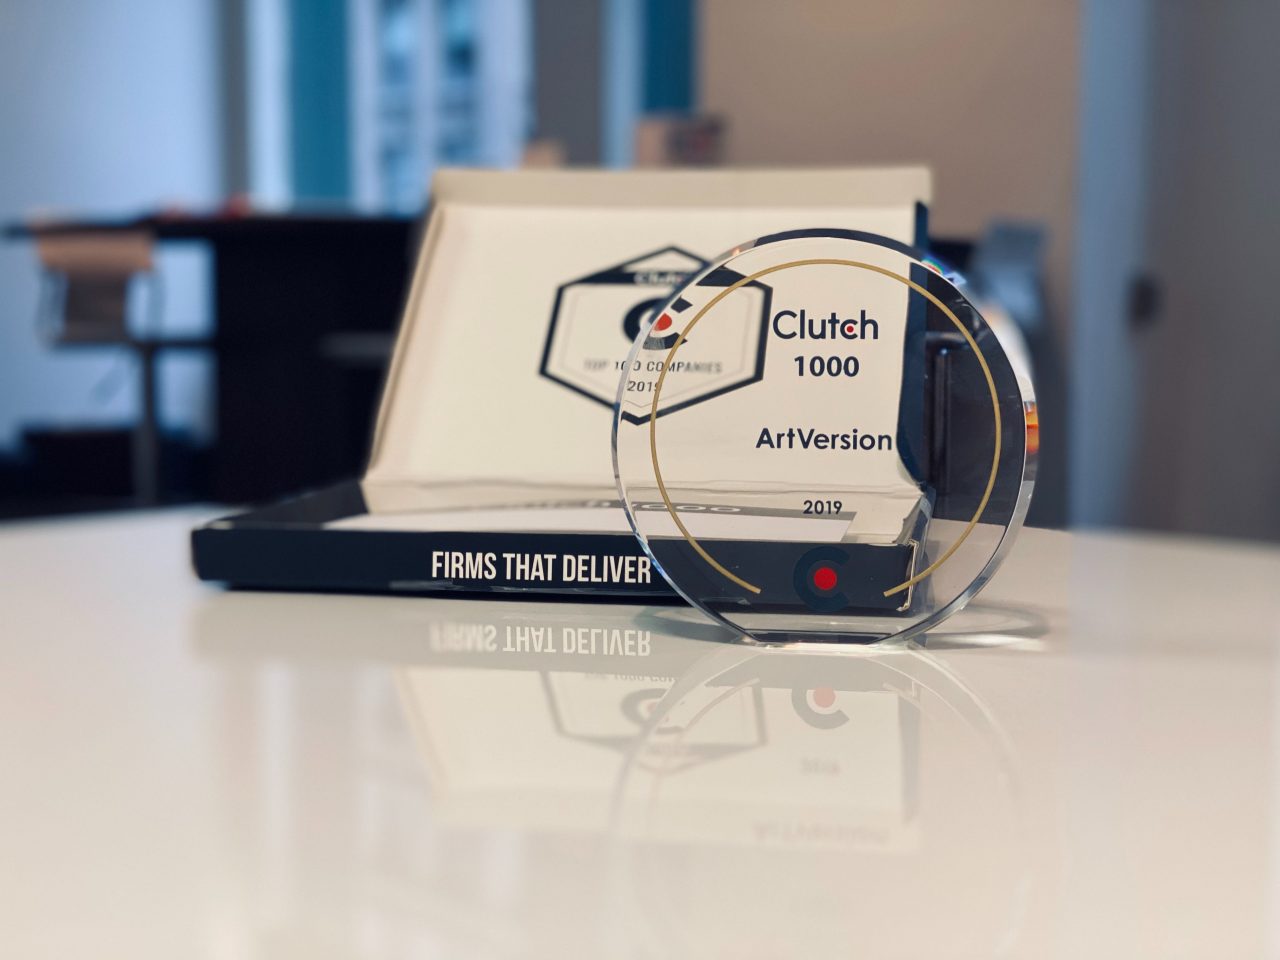 ArtVersion Recognized as #1 Digital Design Agency Globally by Clutch.co in 2019